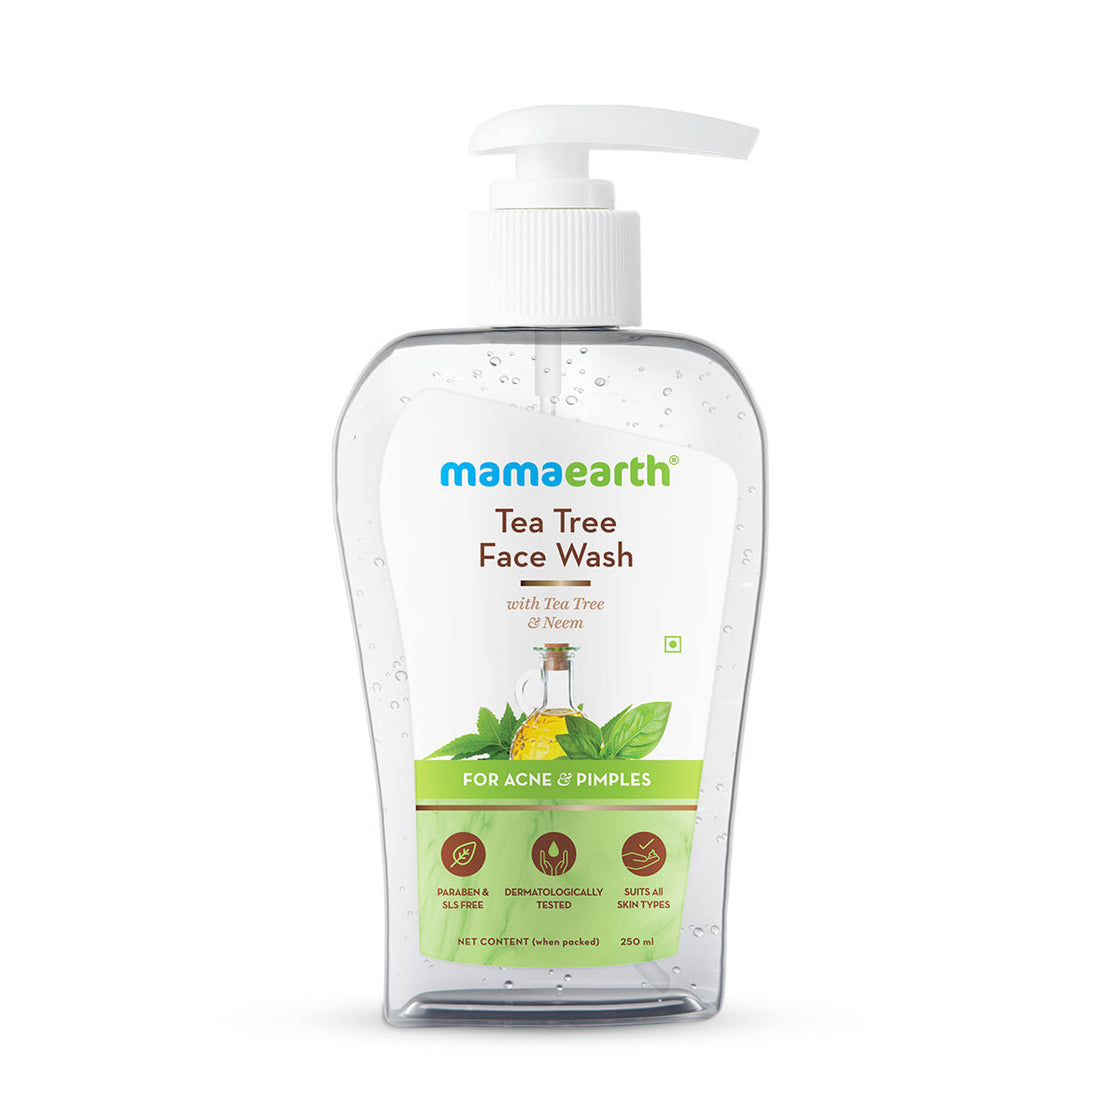 Mamaearth Face Wash With Tea Tree Oil And Neem Extract For Acne &Pimples-9